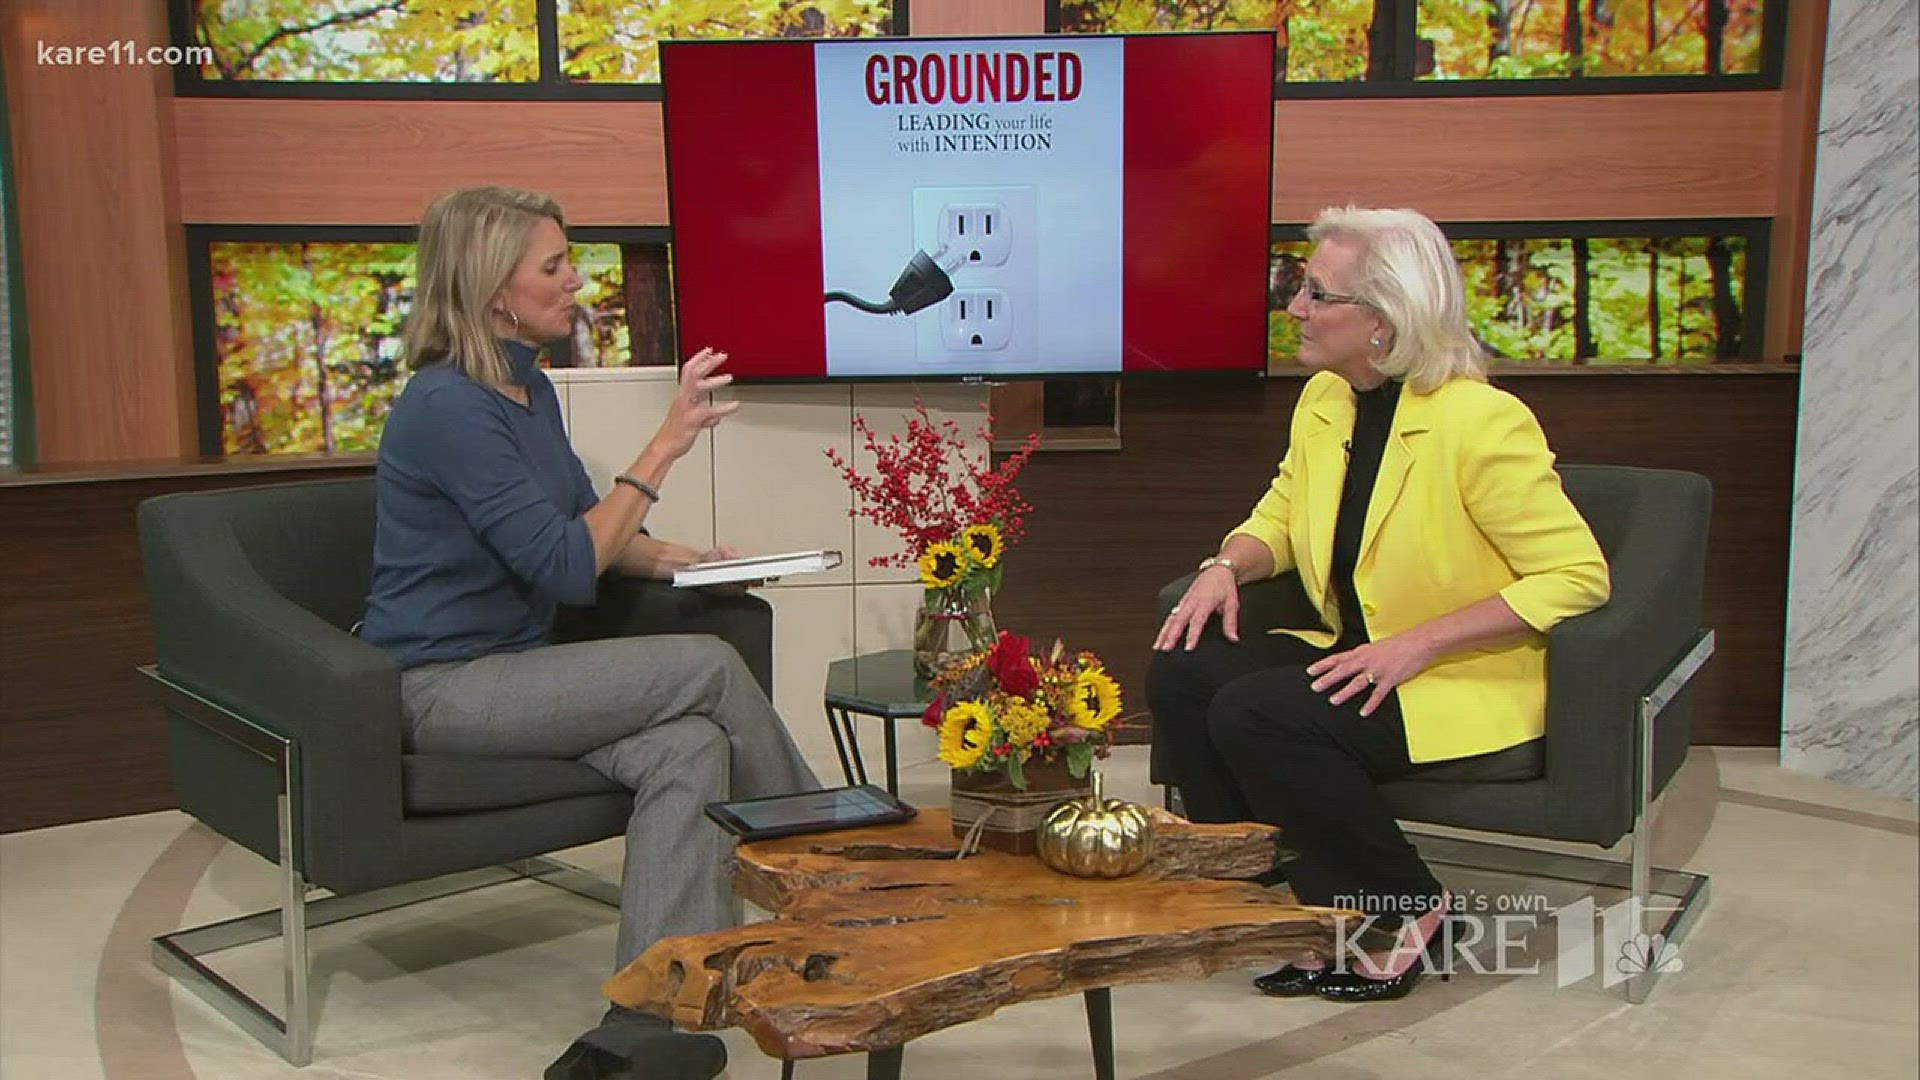 Author Nancy Dahl teaches leading with intention in her new book "Grounded."